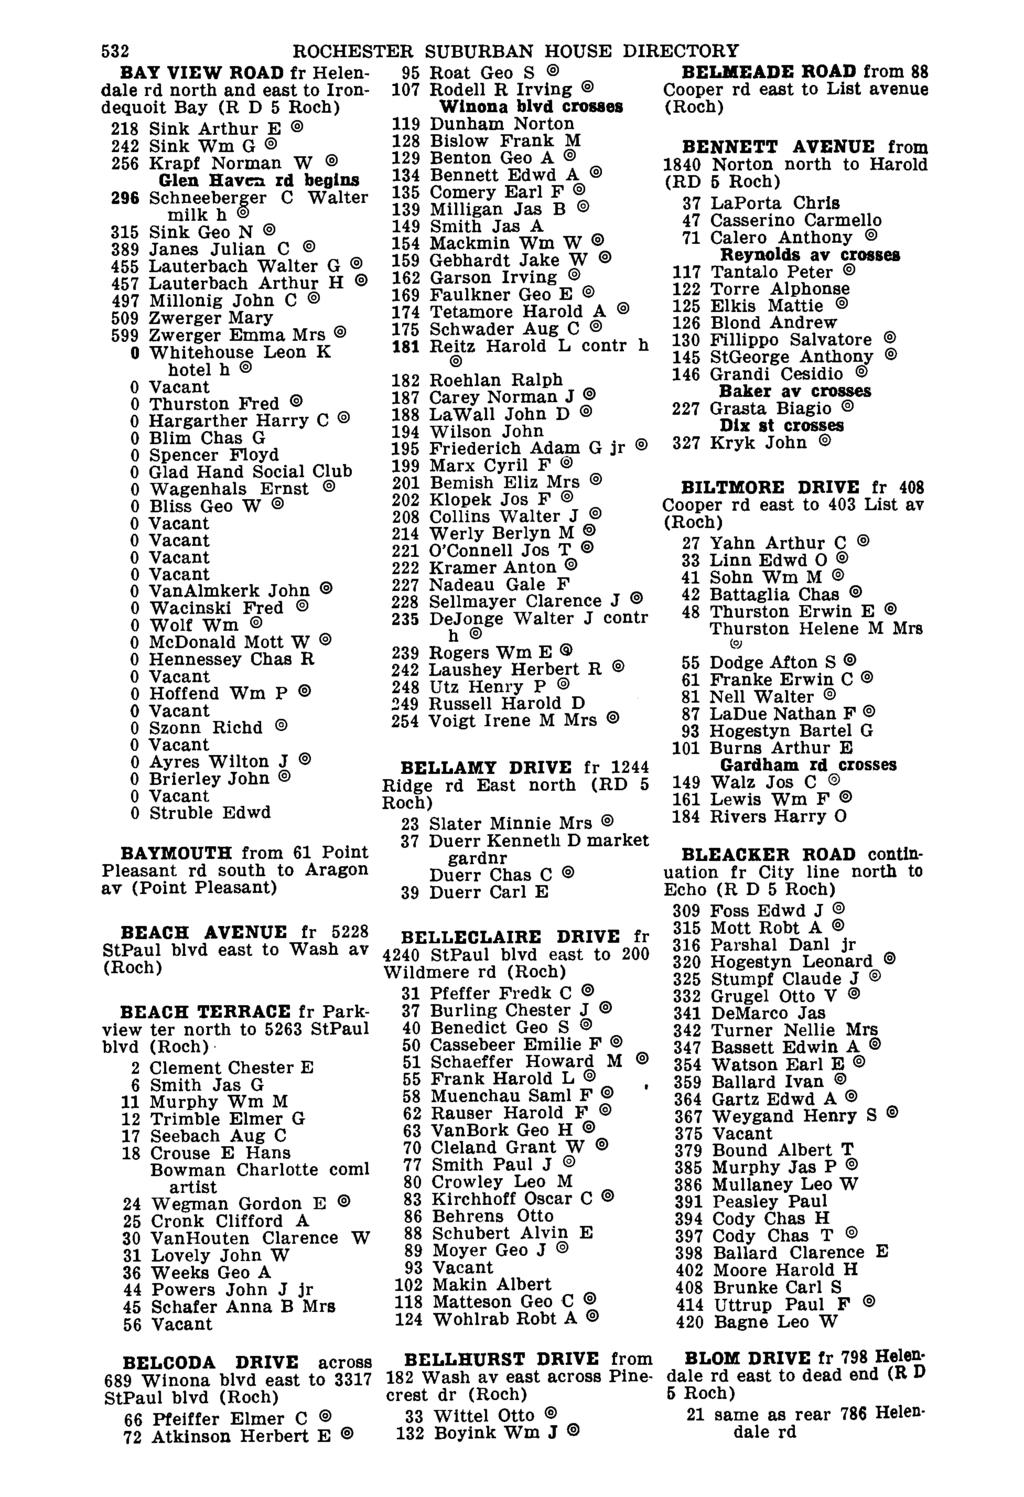 532 ROCHESTER SUBURBAN HOUSE DIRECTORY BAY VIEW ROAD fr Helendale rd north and east to Iron dequoit Bay (R D 5 Roch) 218 Sink Arthur E 242 Sink Wm G 256 Krapf Norman W Glen Haven rd begins 296